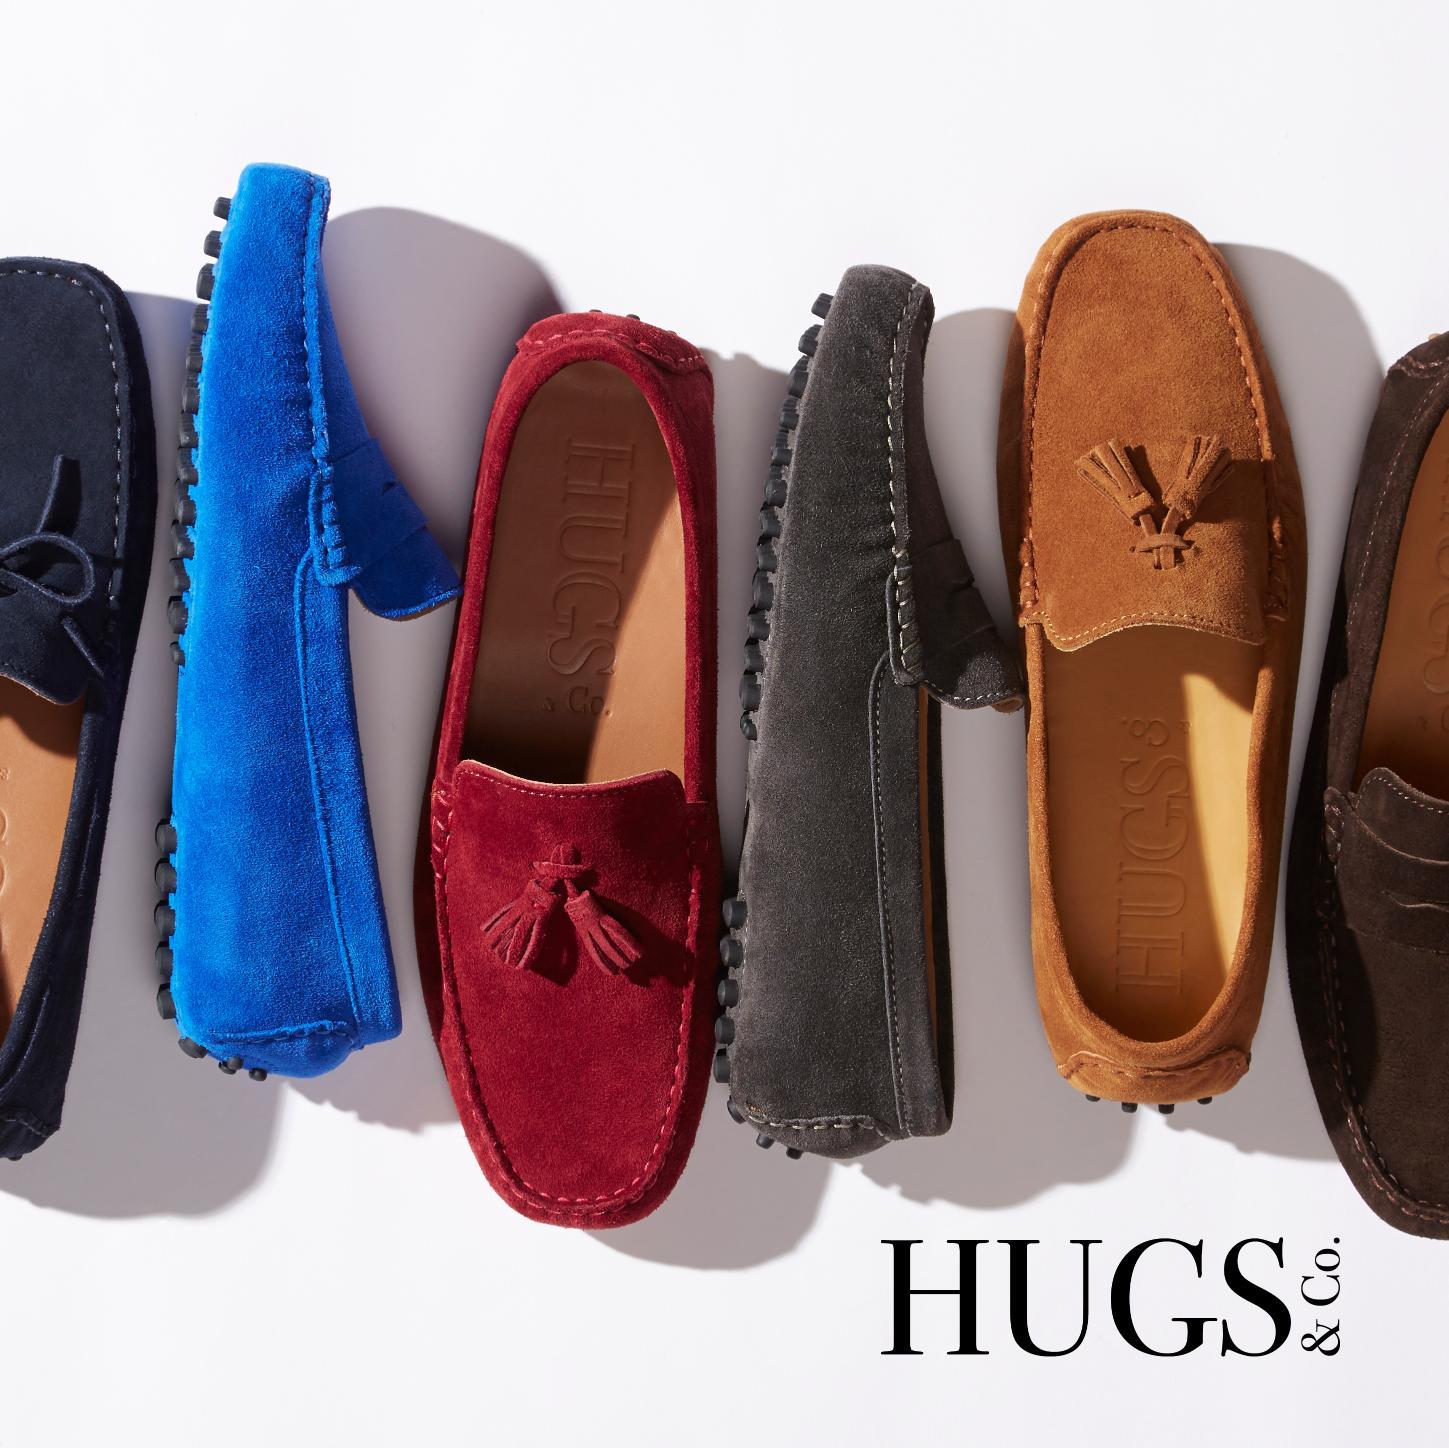 Hugs & Co.: relaxing traditional style... Here at Hugs & Co. we're all about great footwear! Check out the online store to see the full collections.